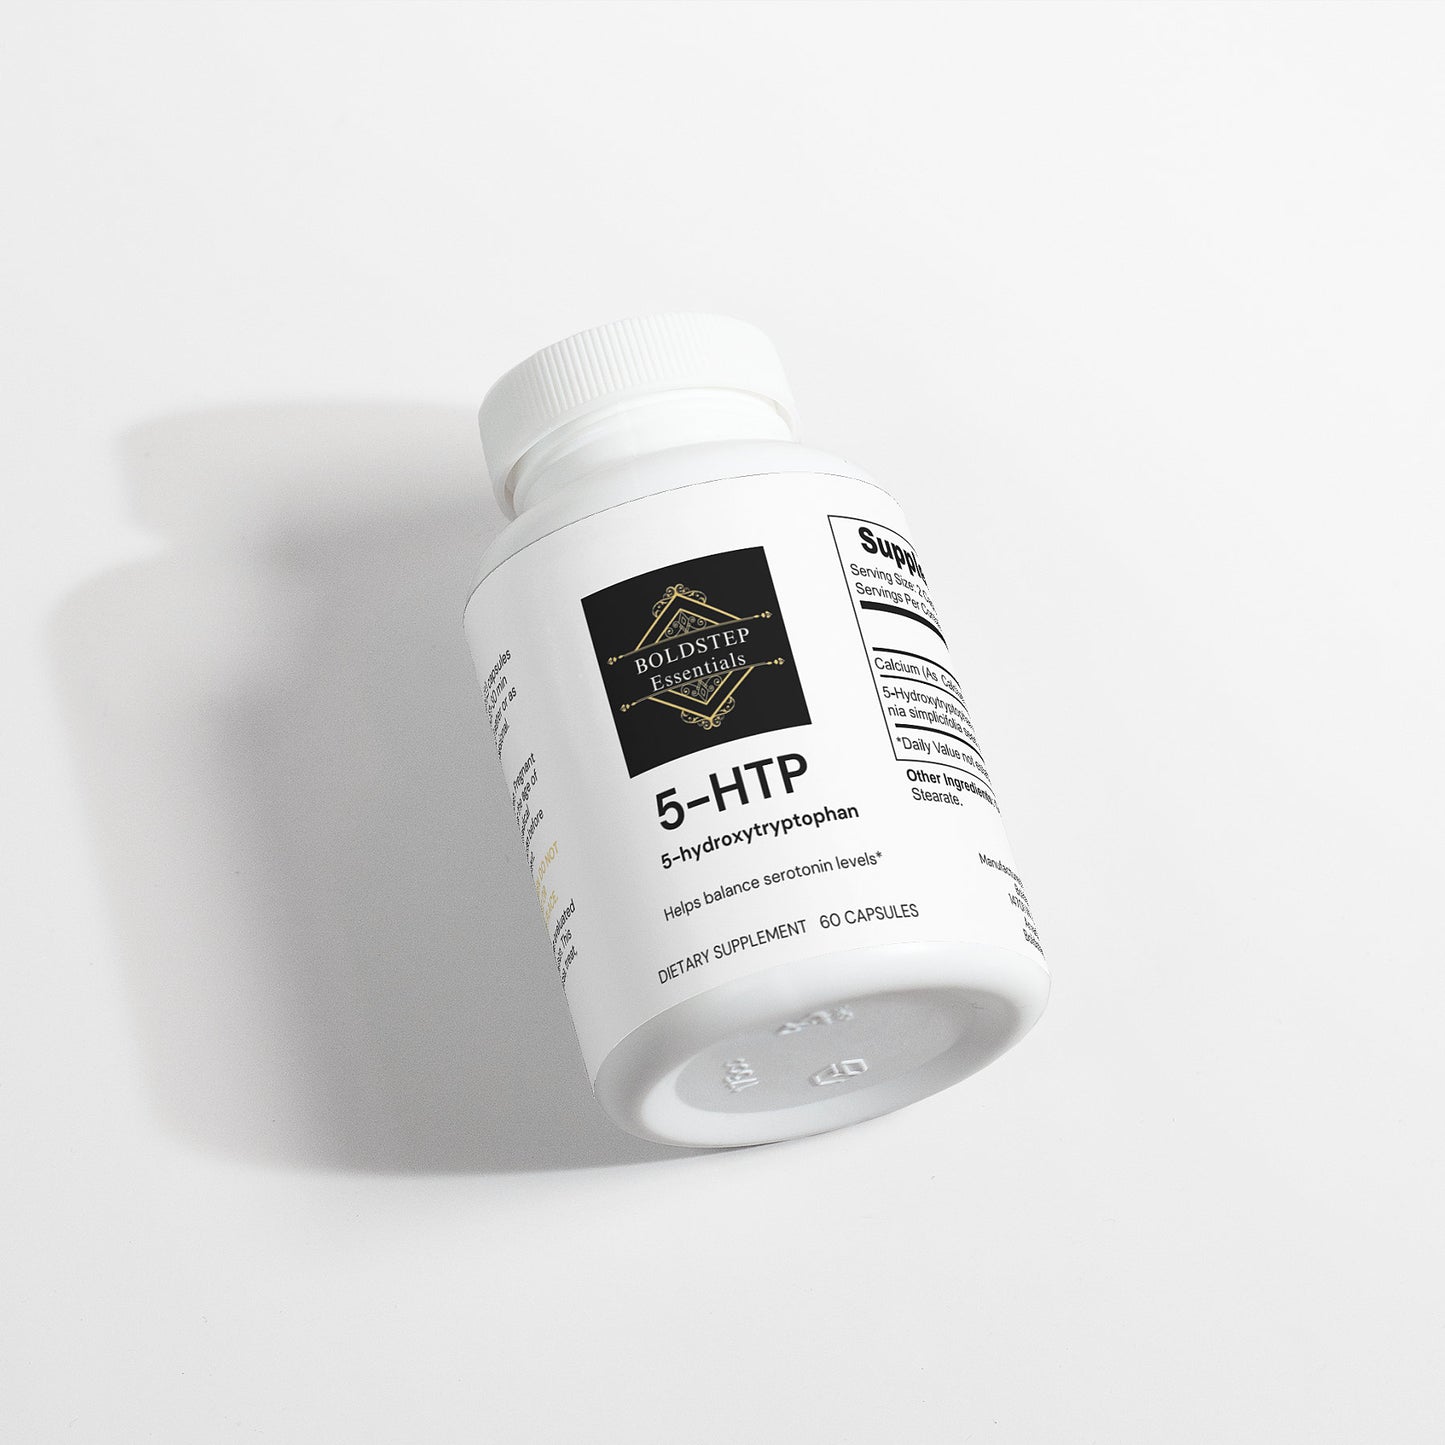 5-HTP: Enhance Sleep, Elevate Mood, Ease Anxiety, Control Hunger, and Soothe Pain Sensitivity. Product of the USA.